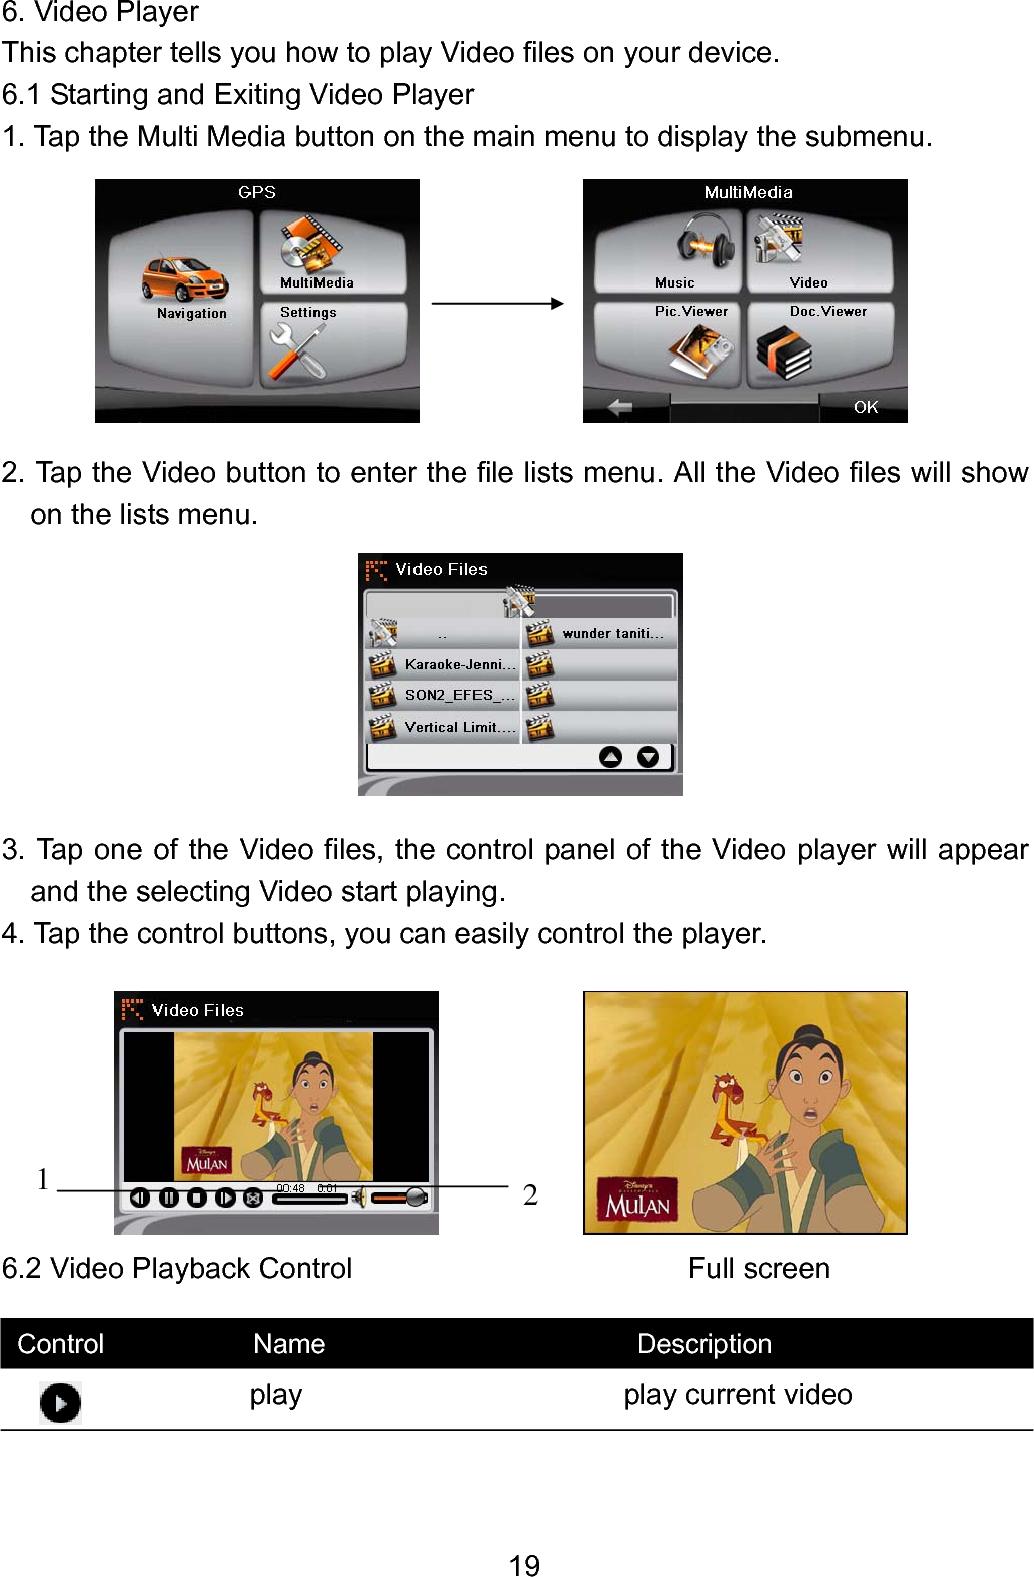  196. Video Player This chapter tells you how to play Video files on your device. 6.1 Starting and Exiting Video Player 1. Tap the Multi Media button on the main menu to display the submenu.        2. Tap the Video button to enter the file lists menu. All the Video files will show on the lists menu.            3. Tap one of the Video files, the control panel of the Video player will appear     and the selecting Video start playing. 4. Tap the control buttons, you can easily control the player.        6.2 Video Playback Control                       Full screen                    play                      play current video              Control           Name                       Description 2 1 